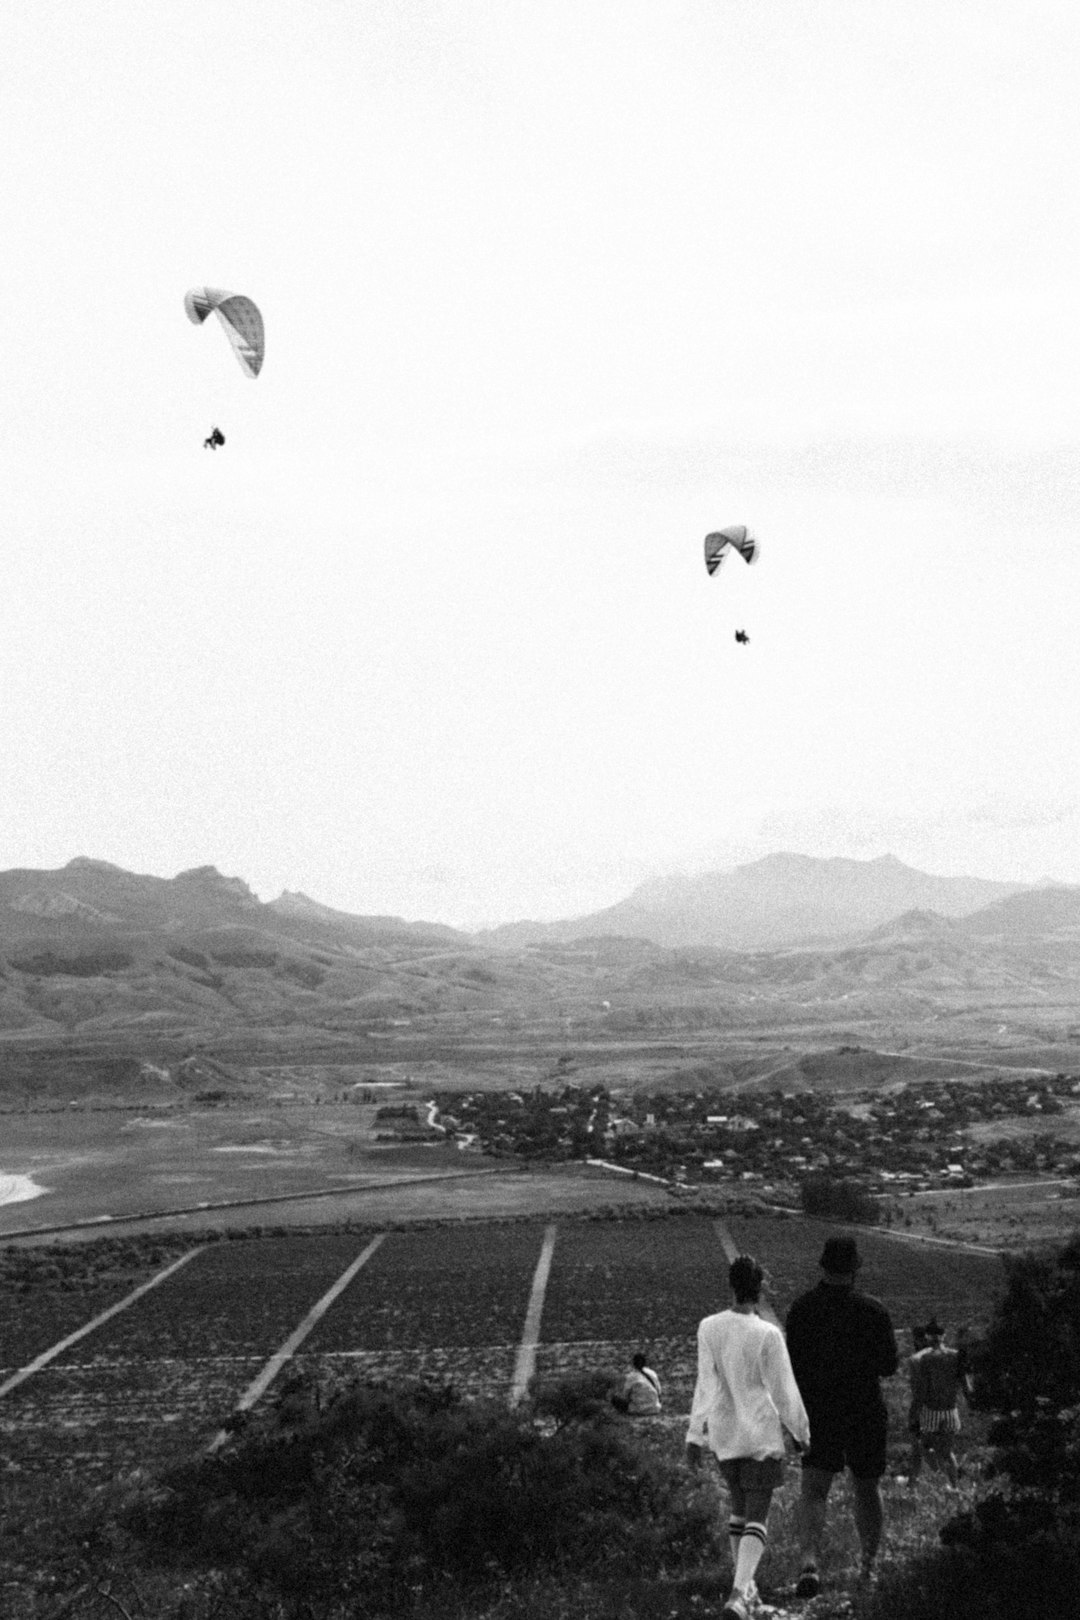 grayscale photo of people on a field with a bird flying over the mountains